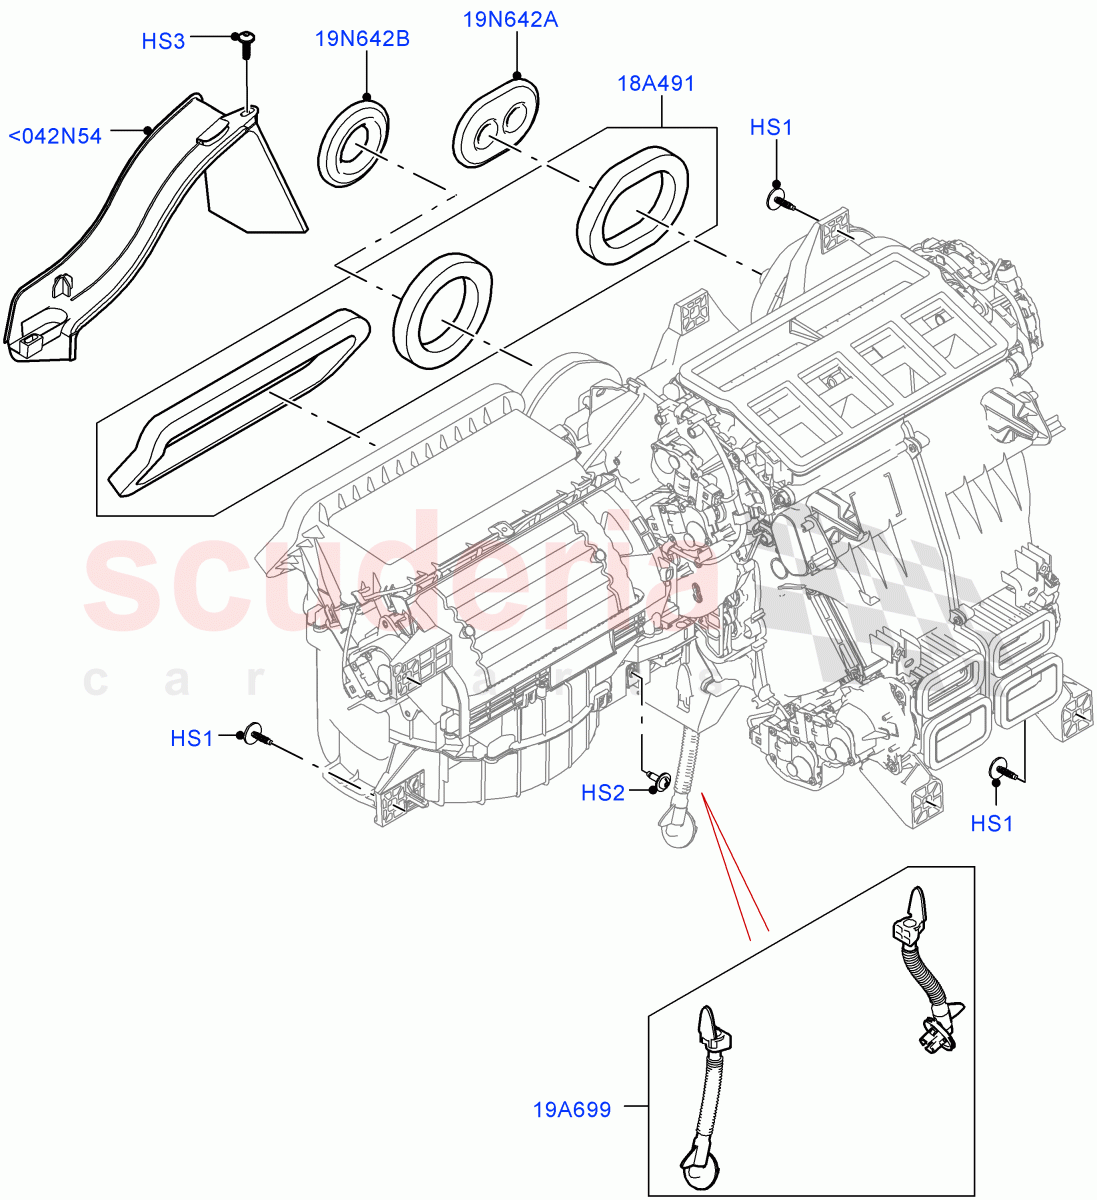 Heater/Air Cond.External Components(Main Unit, Nitra Plant Build) of Land Rover Land Rover Defender (2020+) [5.0 OHC SGDI SC V8 Petrol]